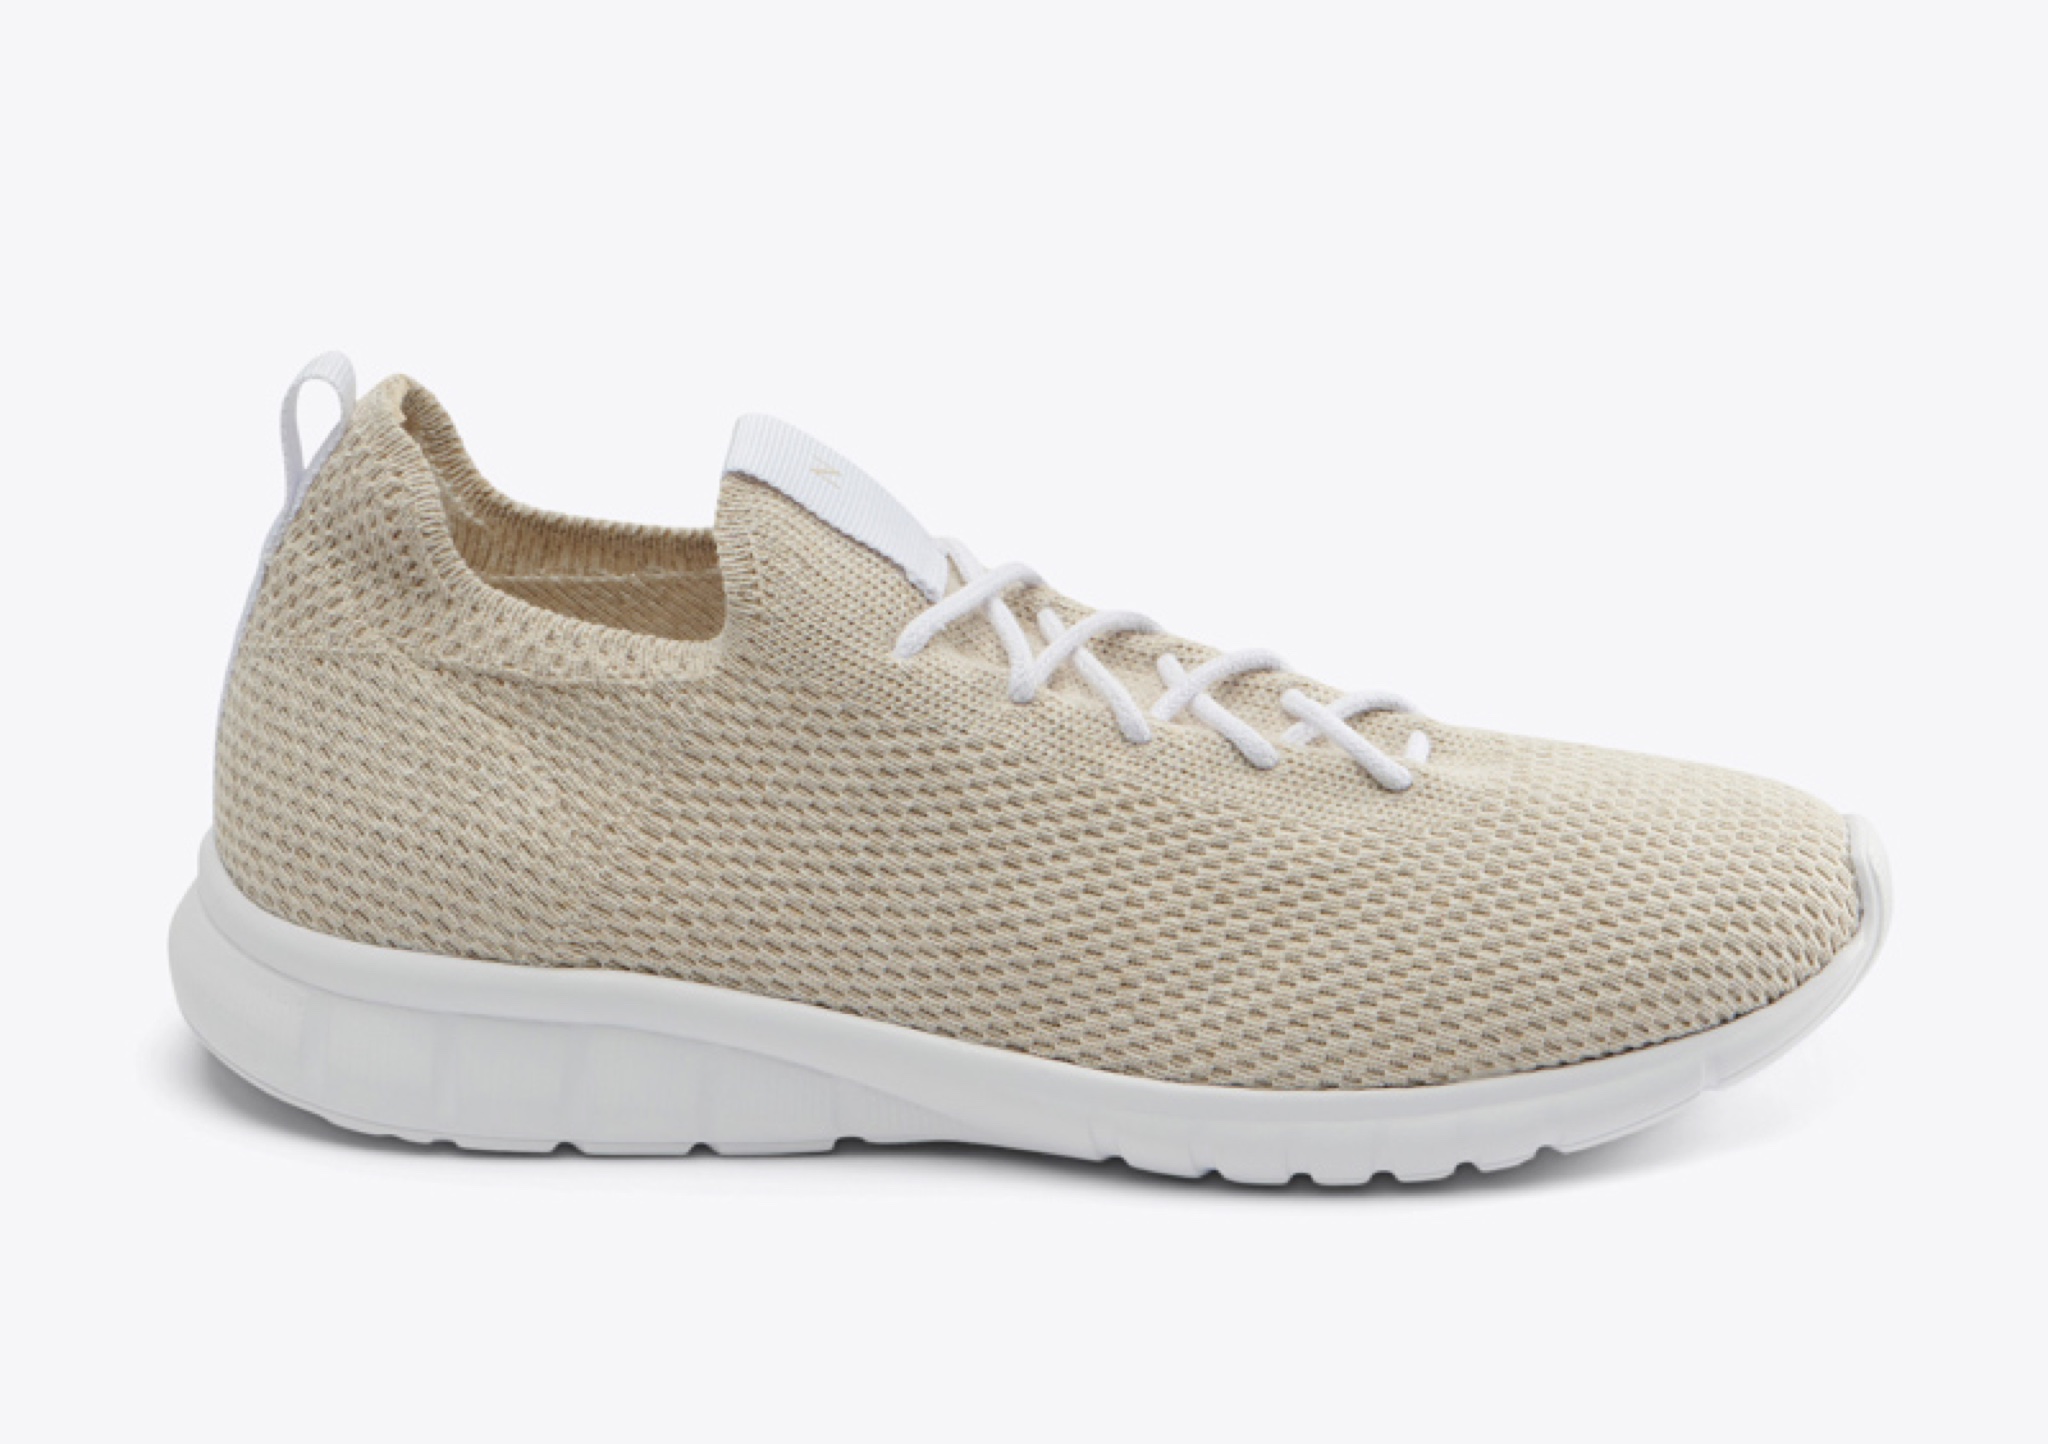 Nisolo Men's All-Day Eco-Knit Sneaker Linen - Every Nisolo product is built on the foundation of comfort, function, and design. 